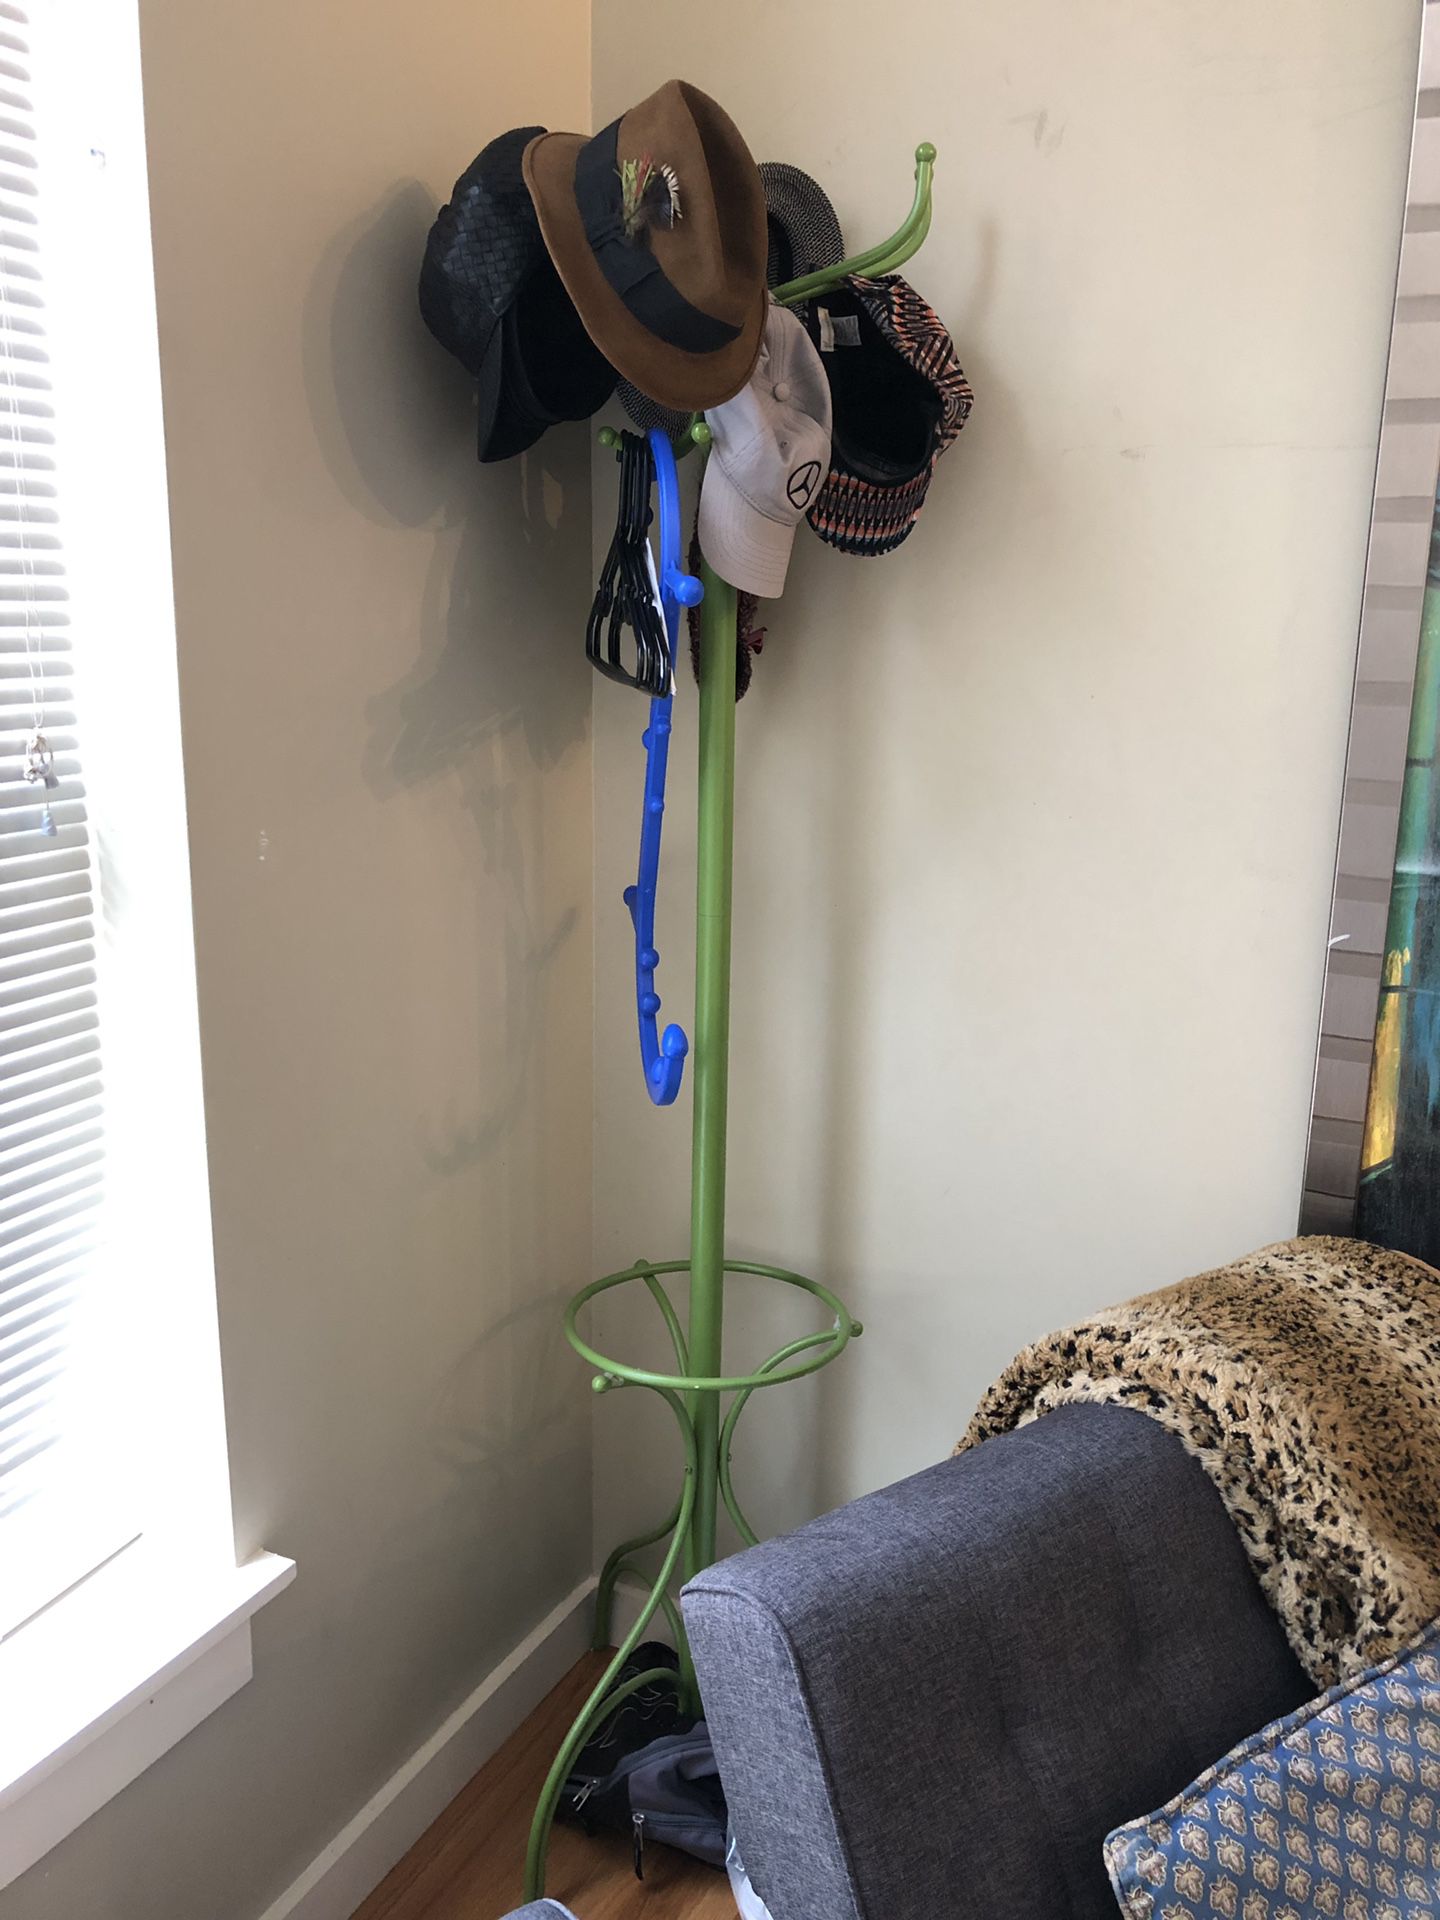 Hat rack from Urban outfitters